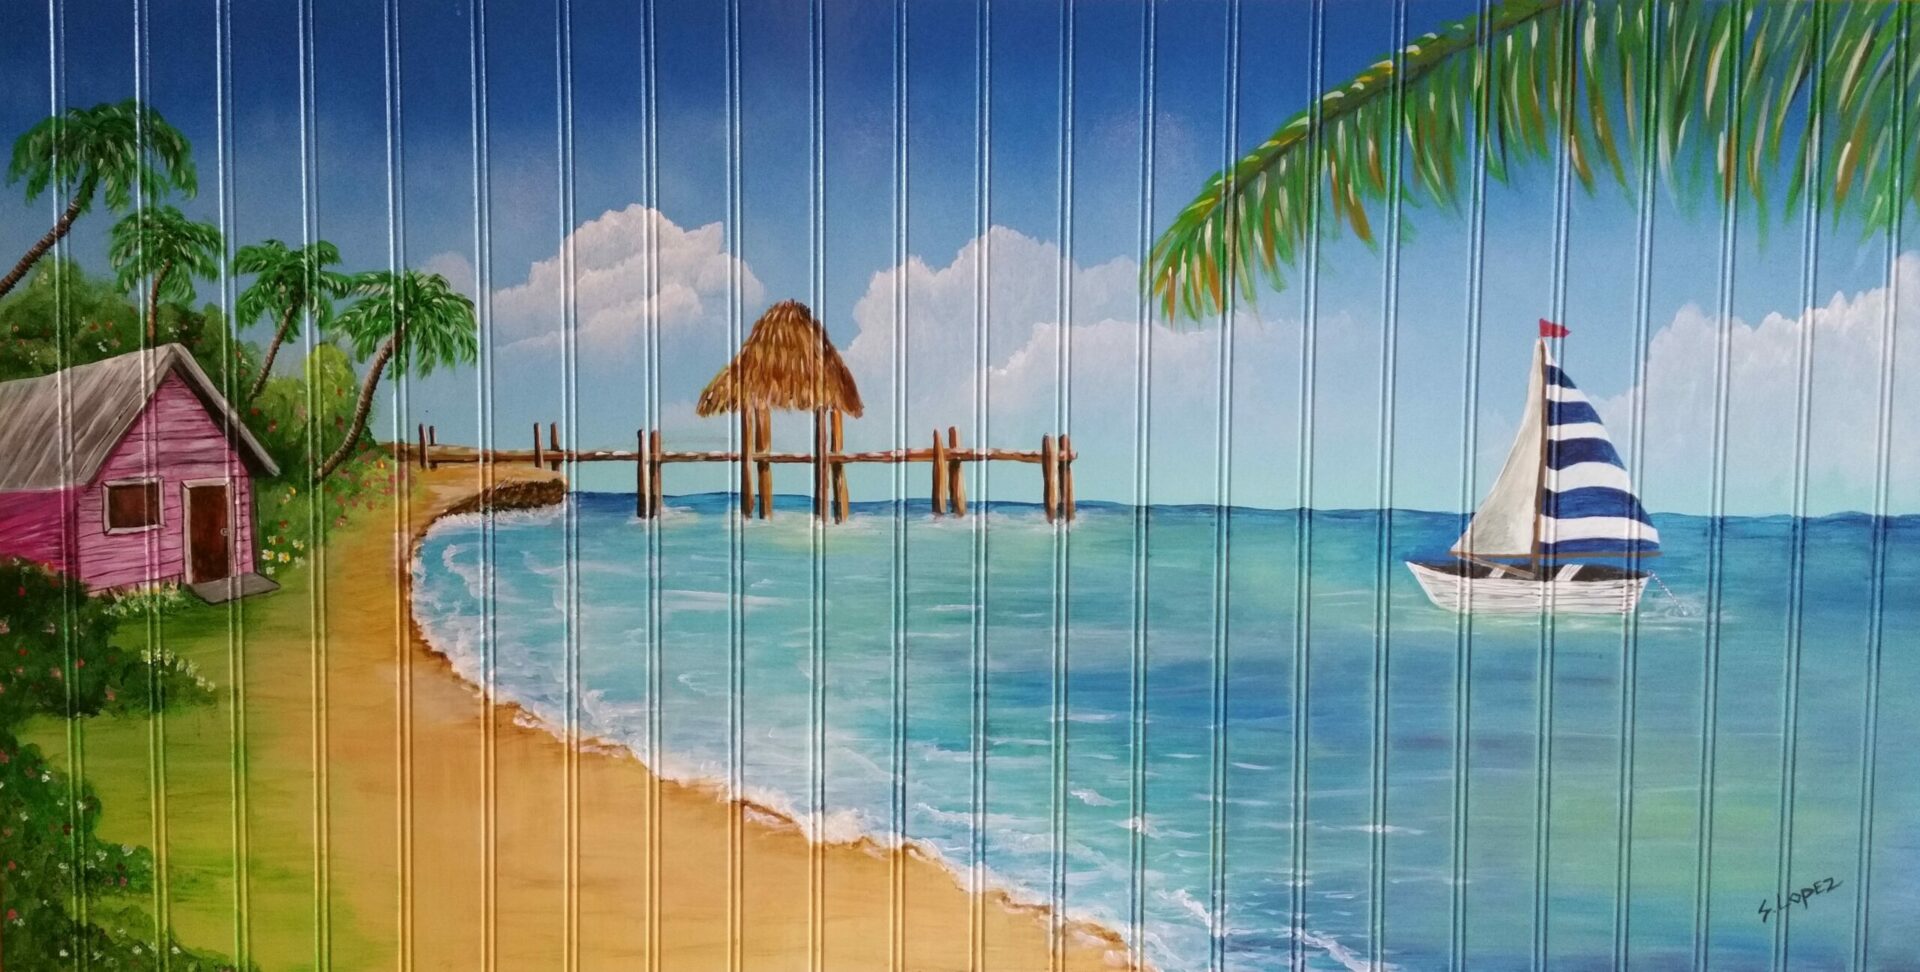 A painting of the ocean and pier with palm trees.